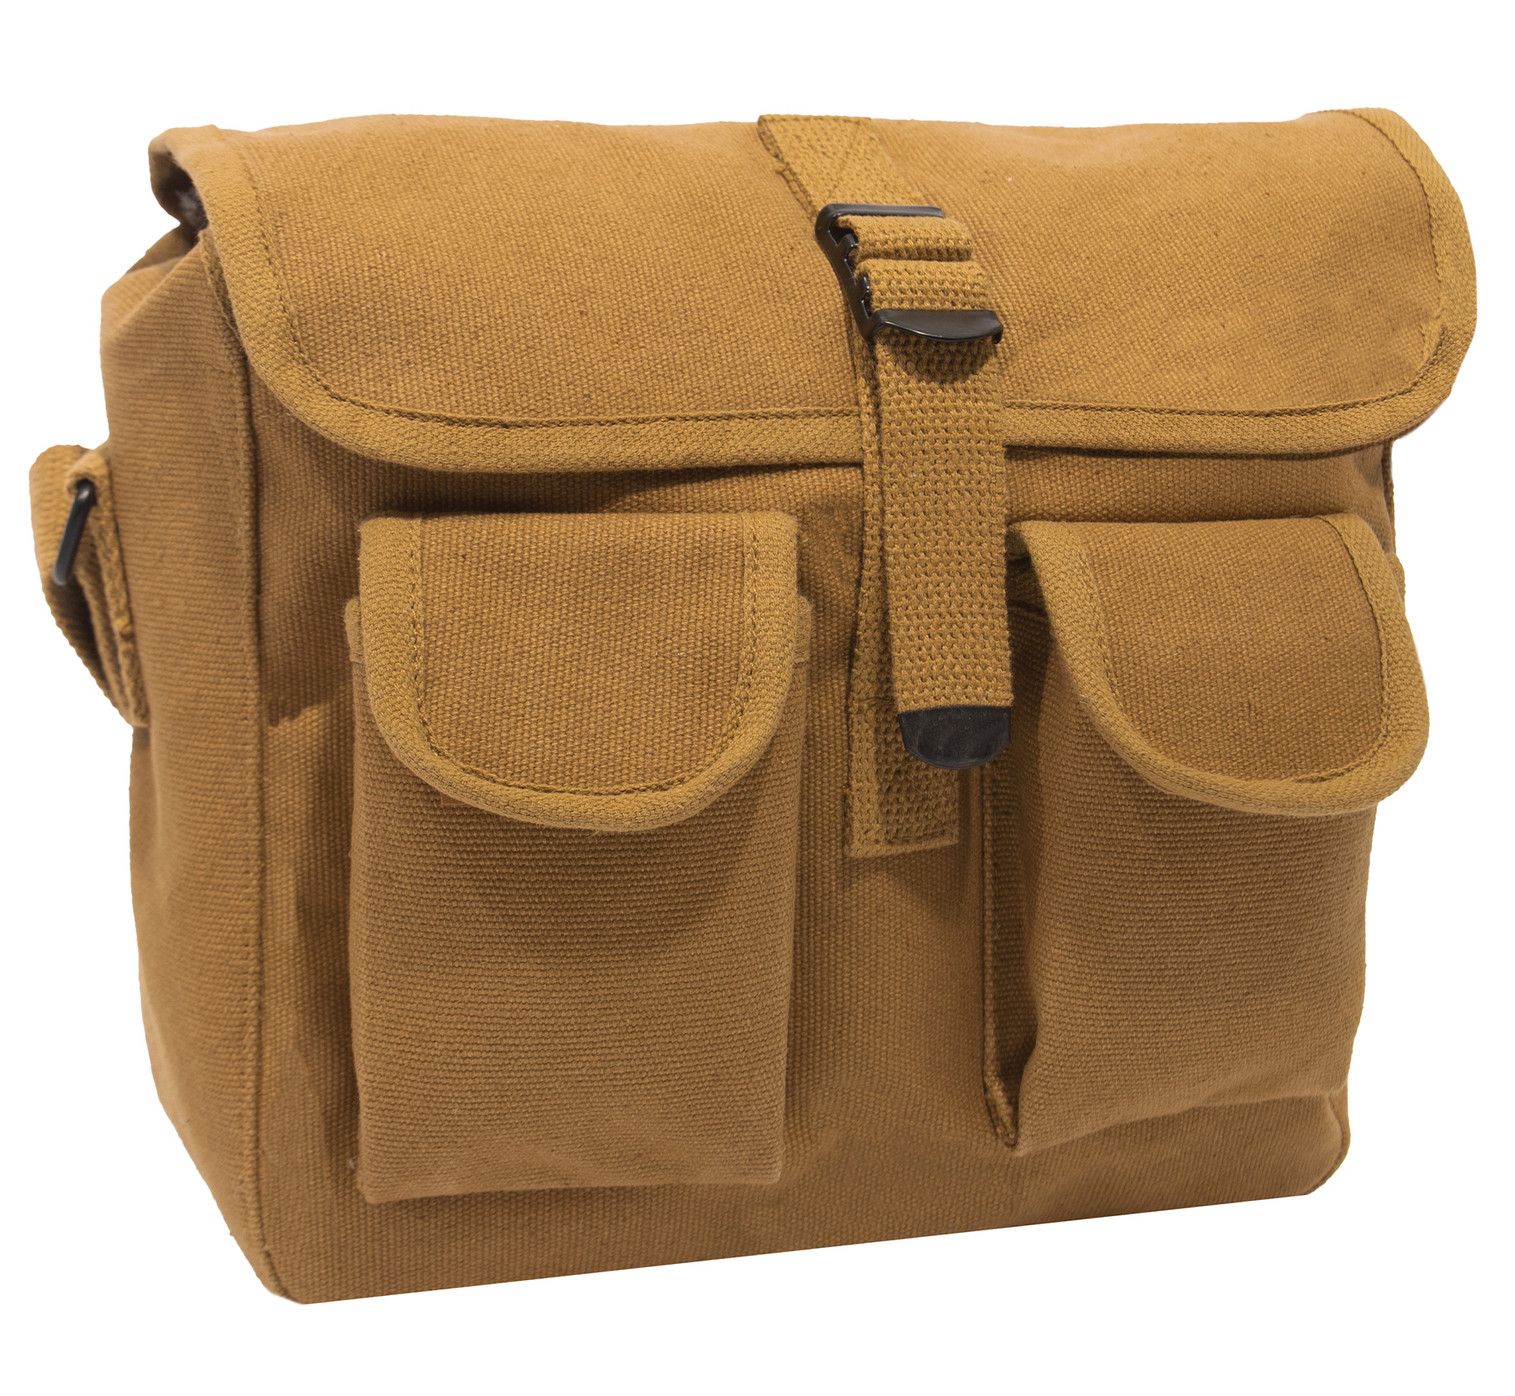 Rothco Canvas Ammo Shoulder Bag - Coyote Brown